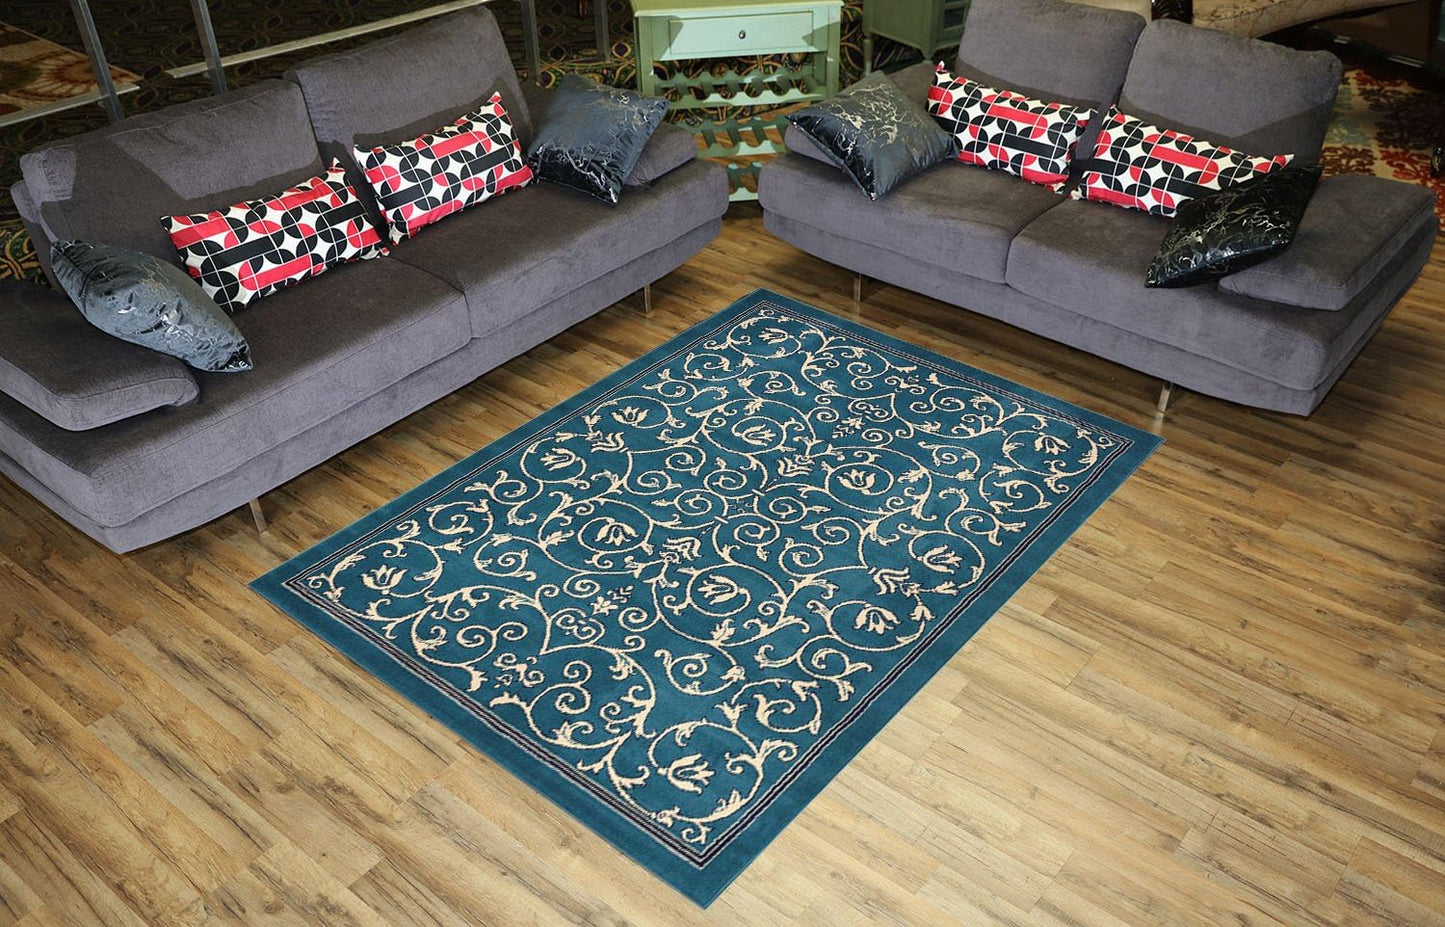 Conur Collection Floral Scroll Area Rug Rugs Modern Contemporary Traditional Area Rug (Petrol Blue, 4'11" x 6'11")